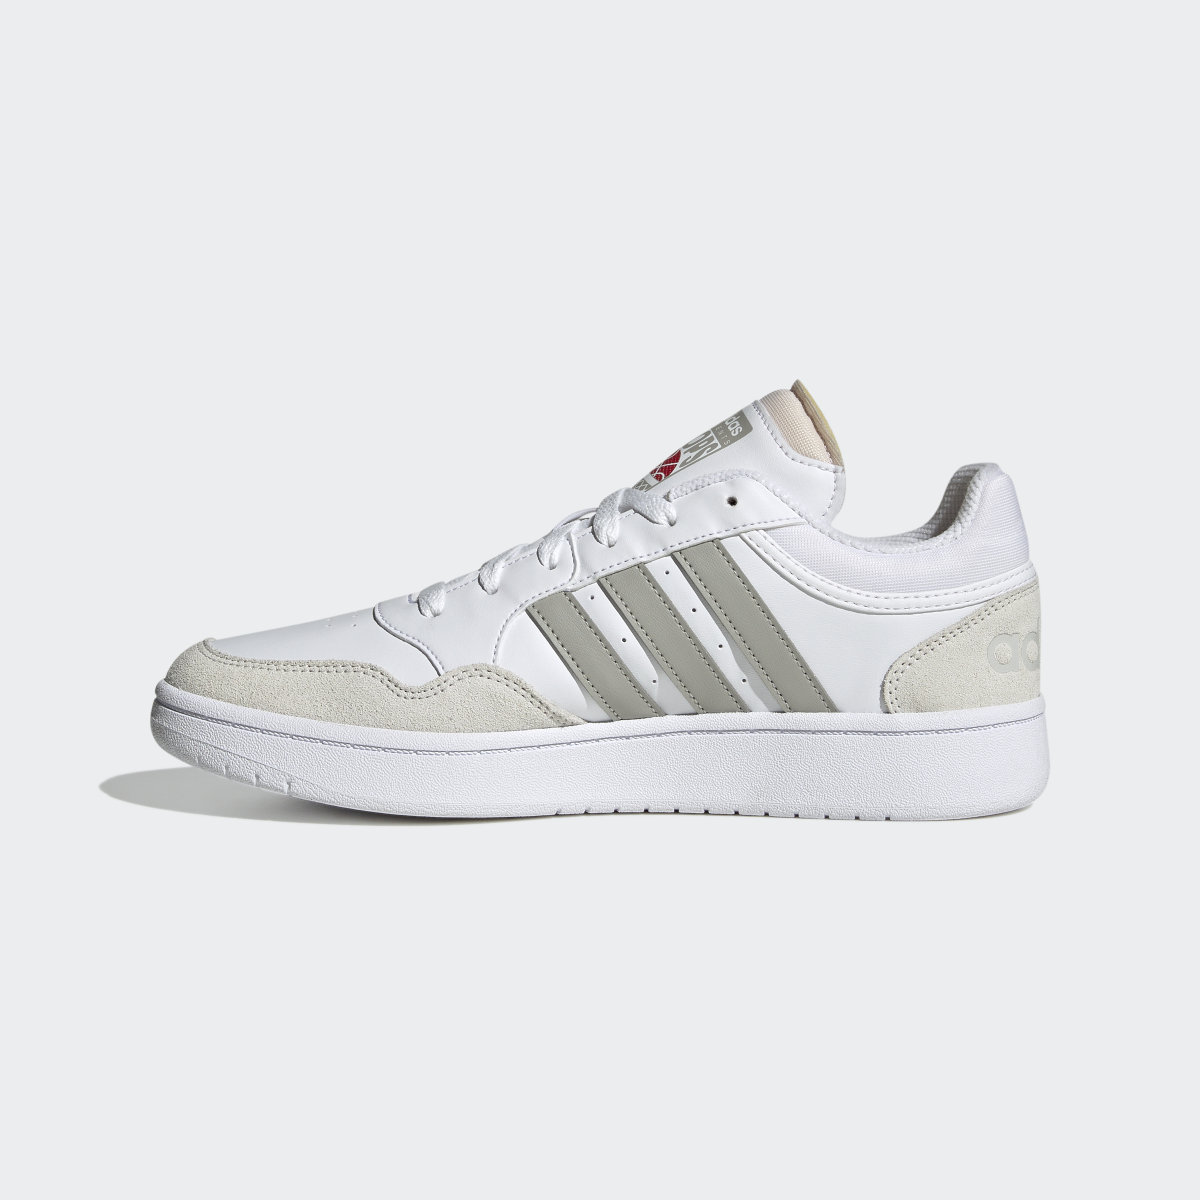 Adidas Zapatilla Hoops 3.0 Lifestyle Basketball Low Classic Vintage. 7